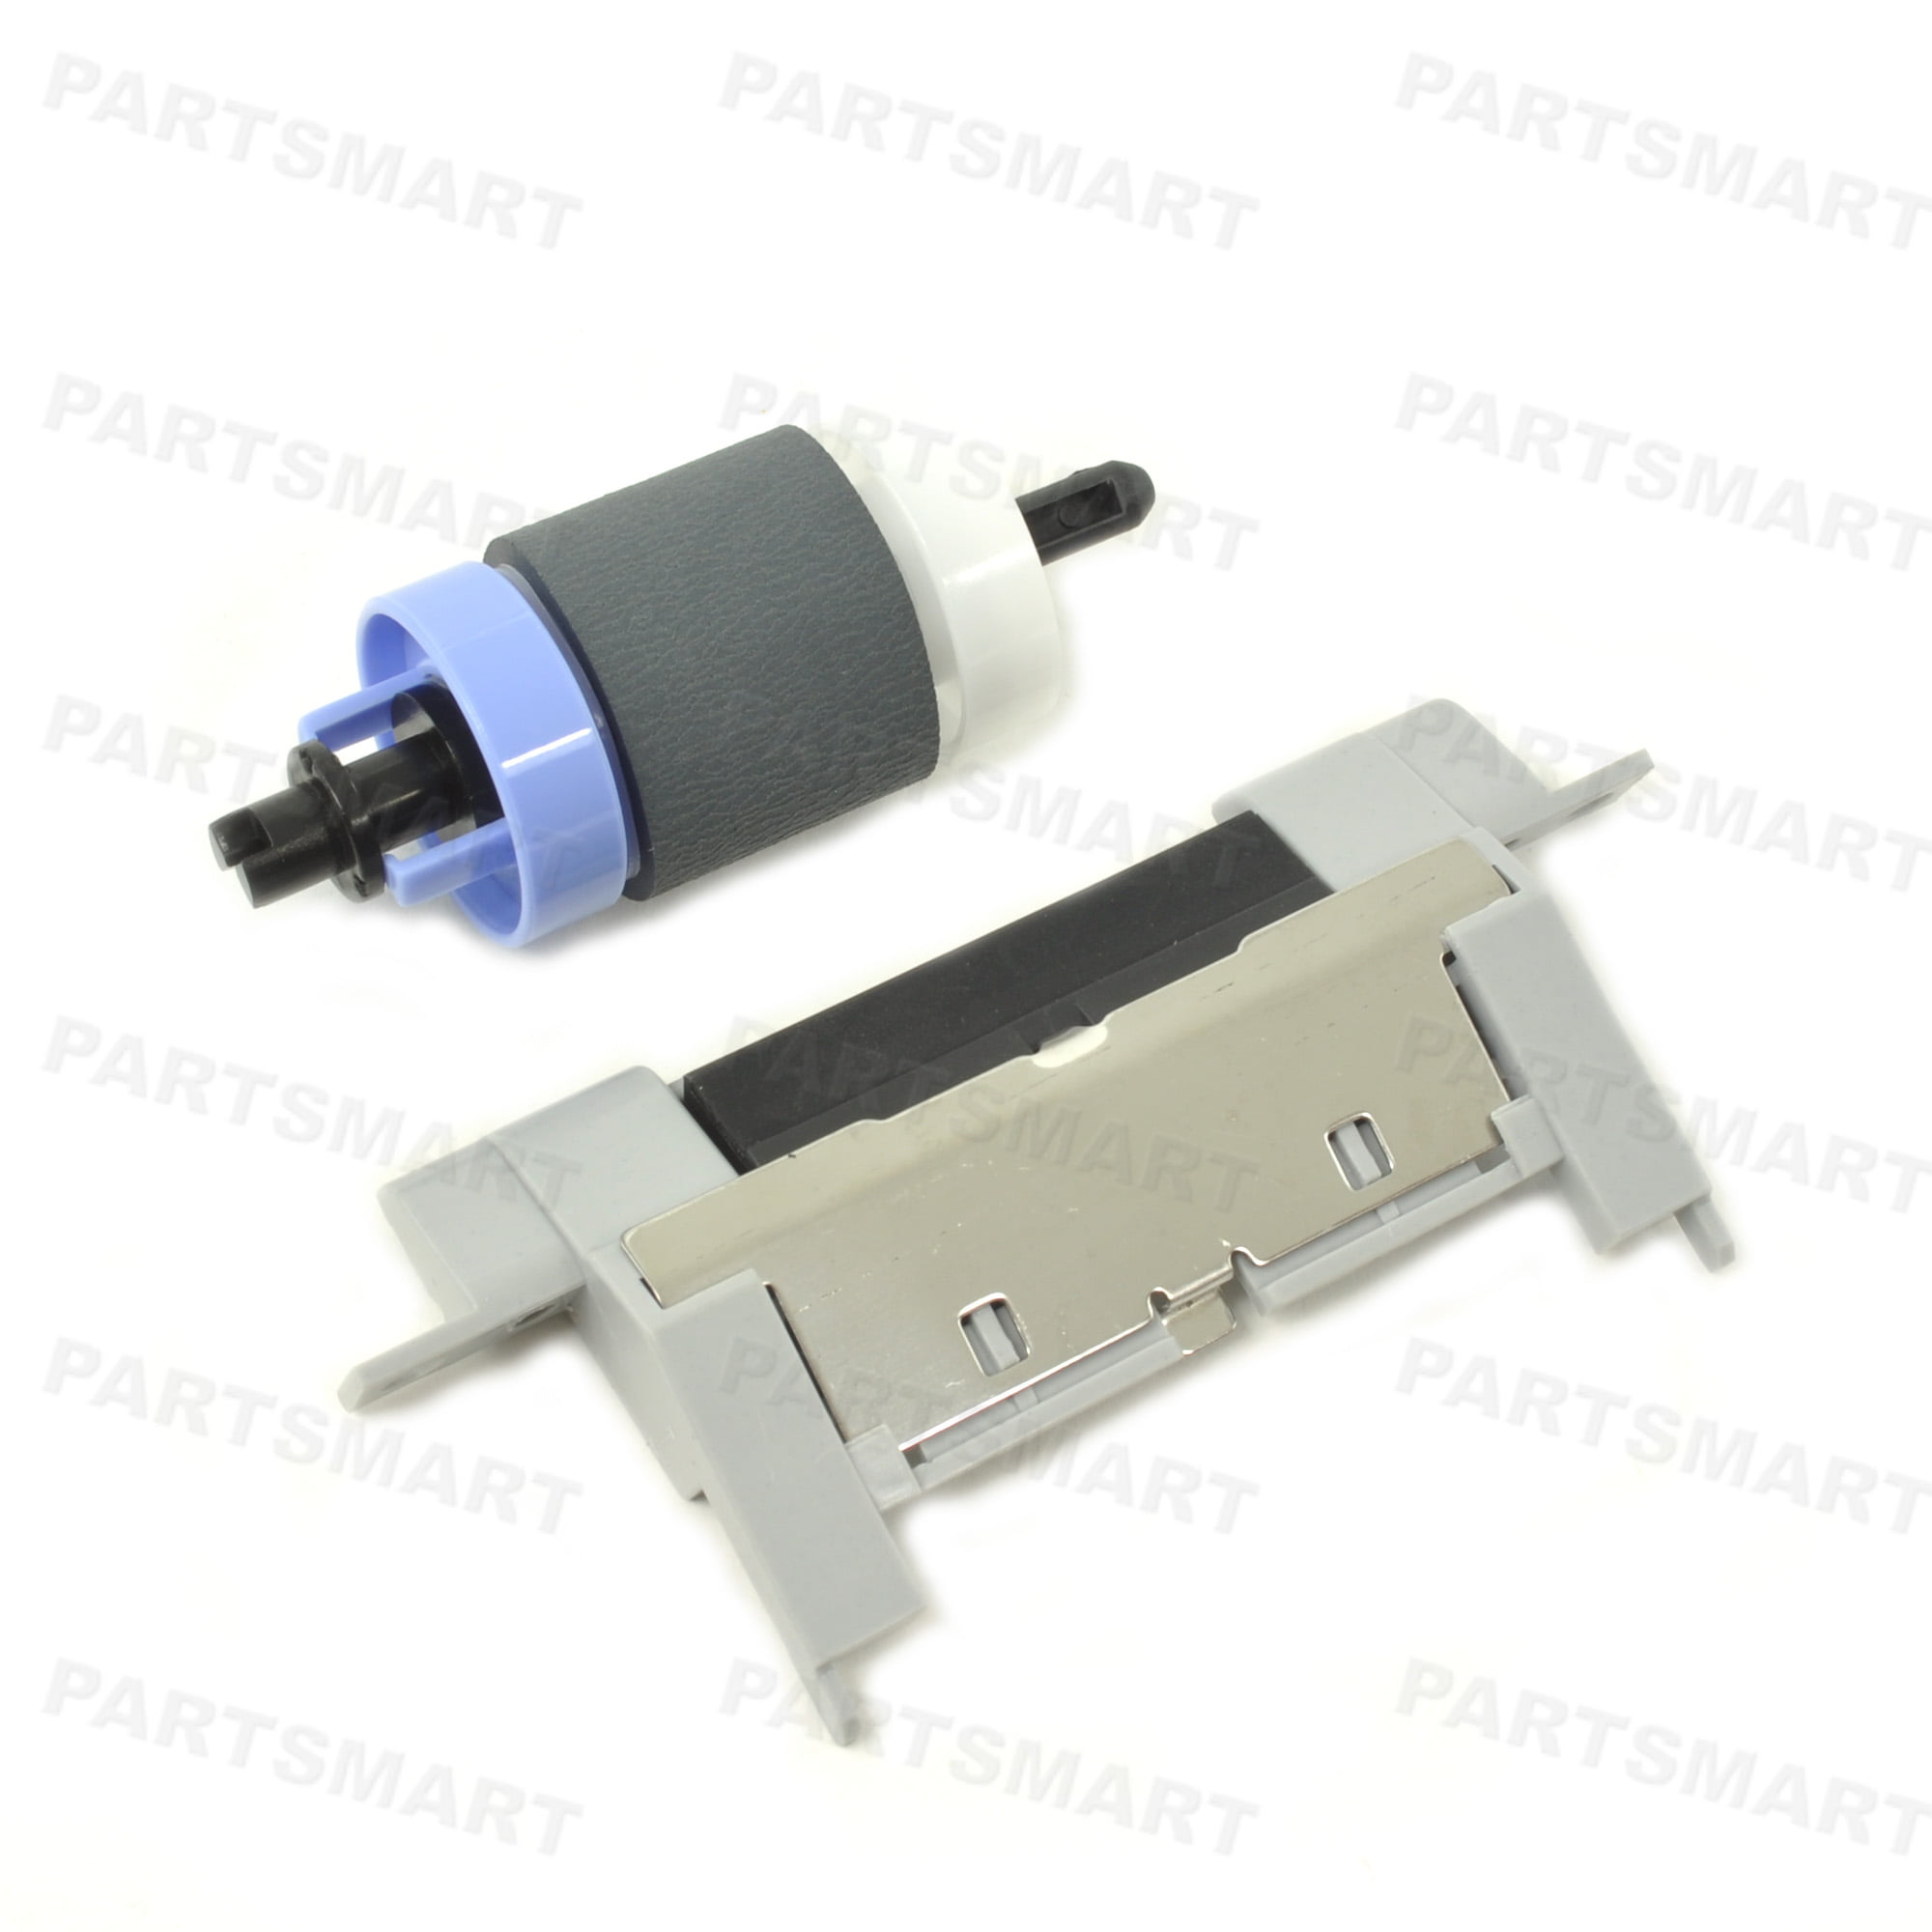 A3E42-65019 Roller Kit, Tray for HP LaserJet Pro M701, M706 and M435 MFP 